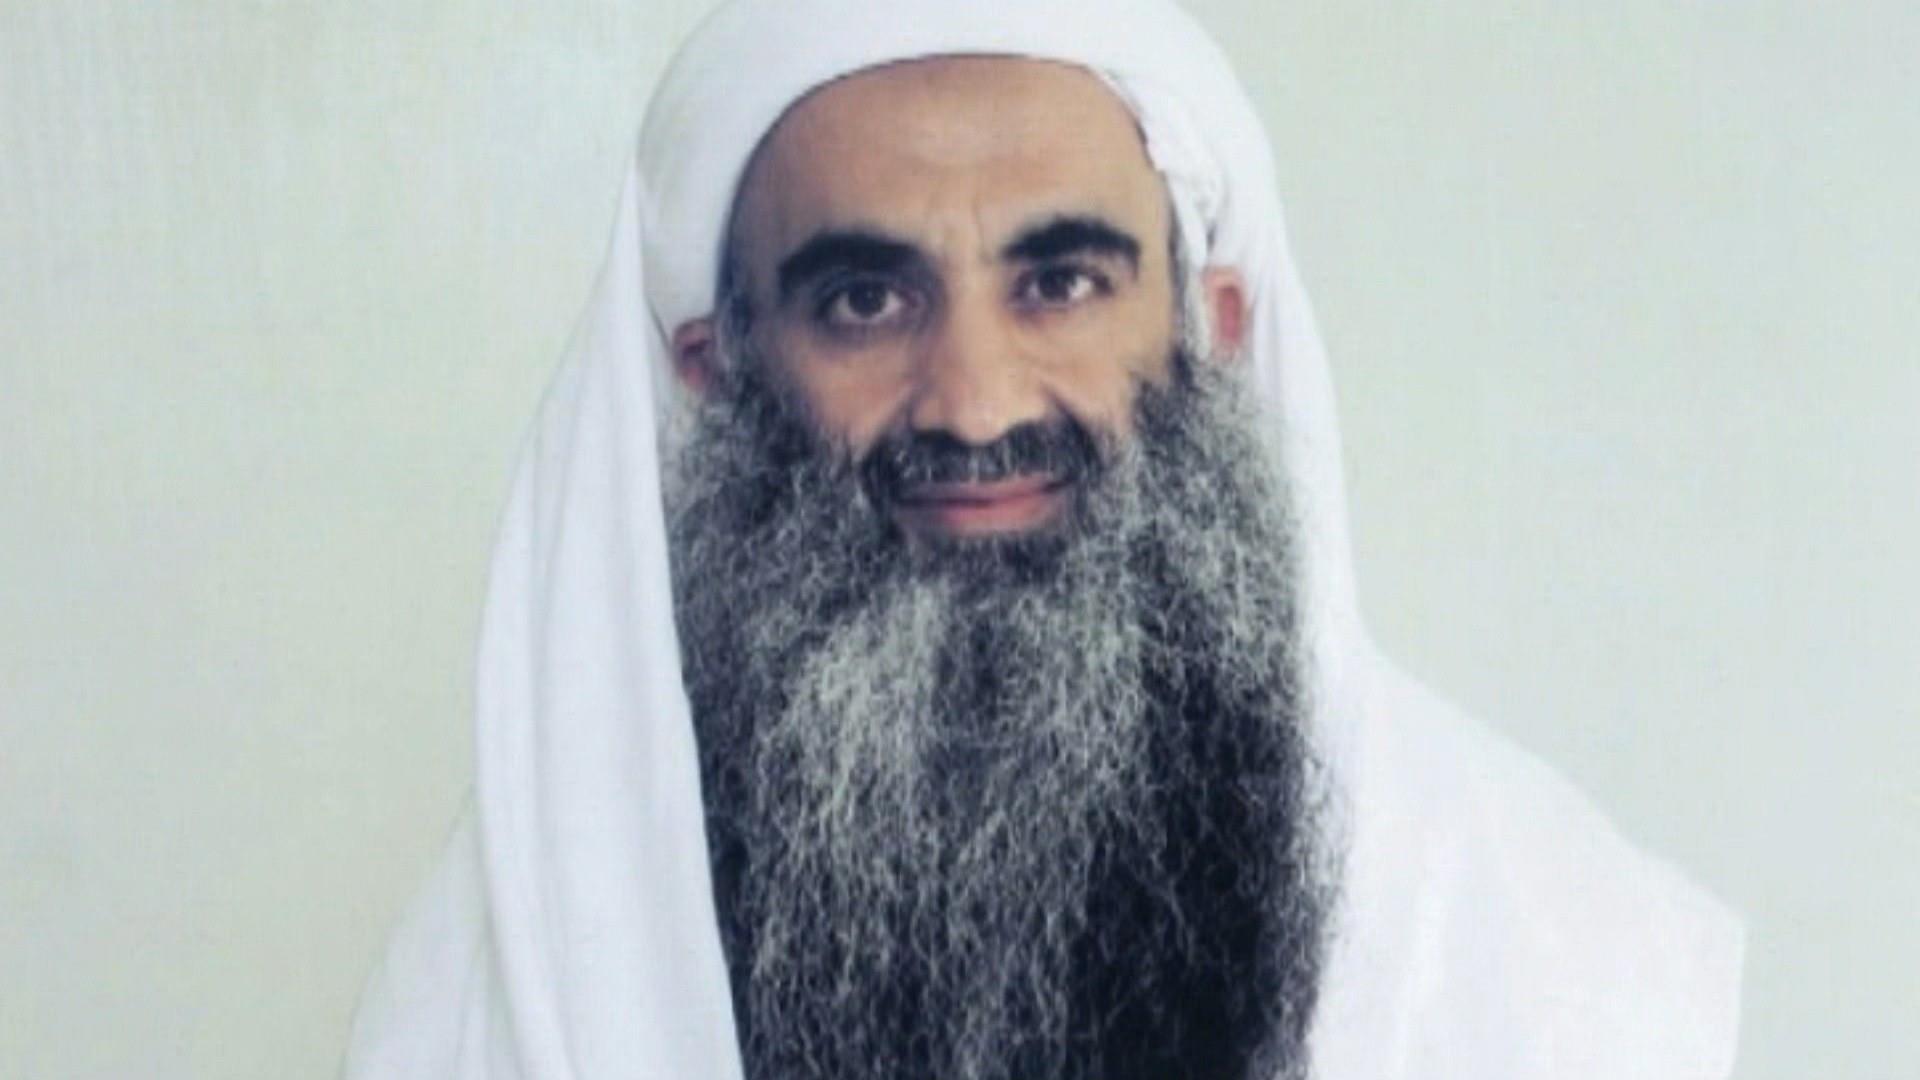 9/11 mastermind Khalid Sheikh Mohammed to go on trial in 2021.